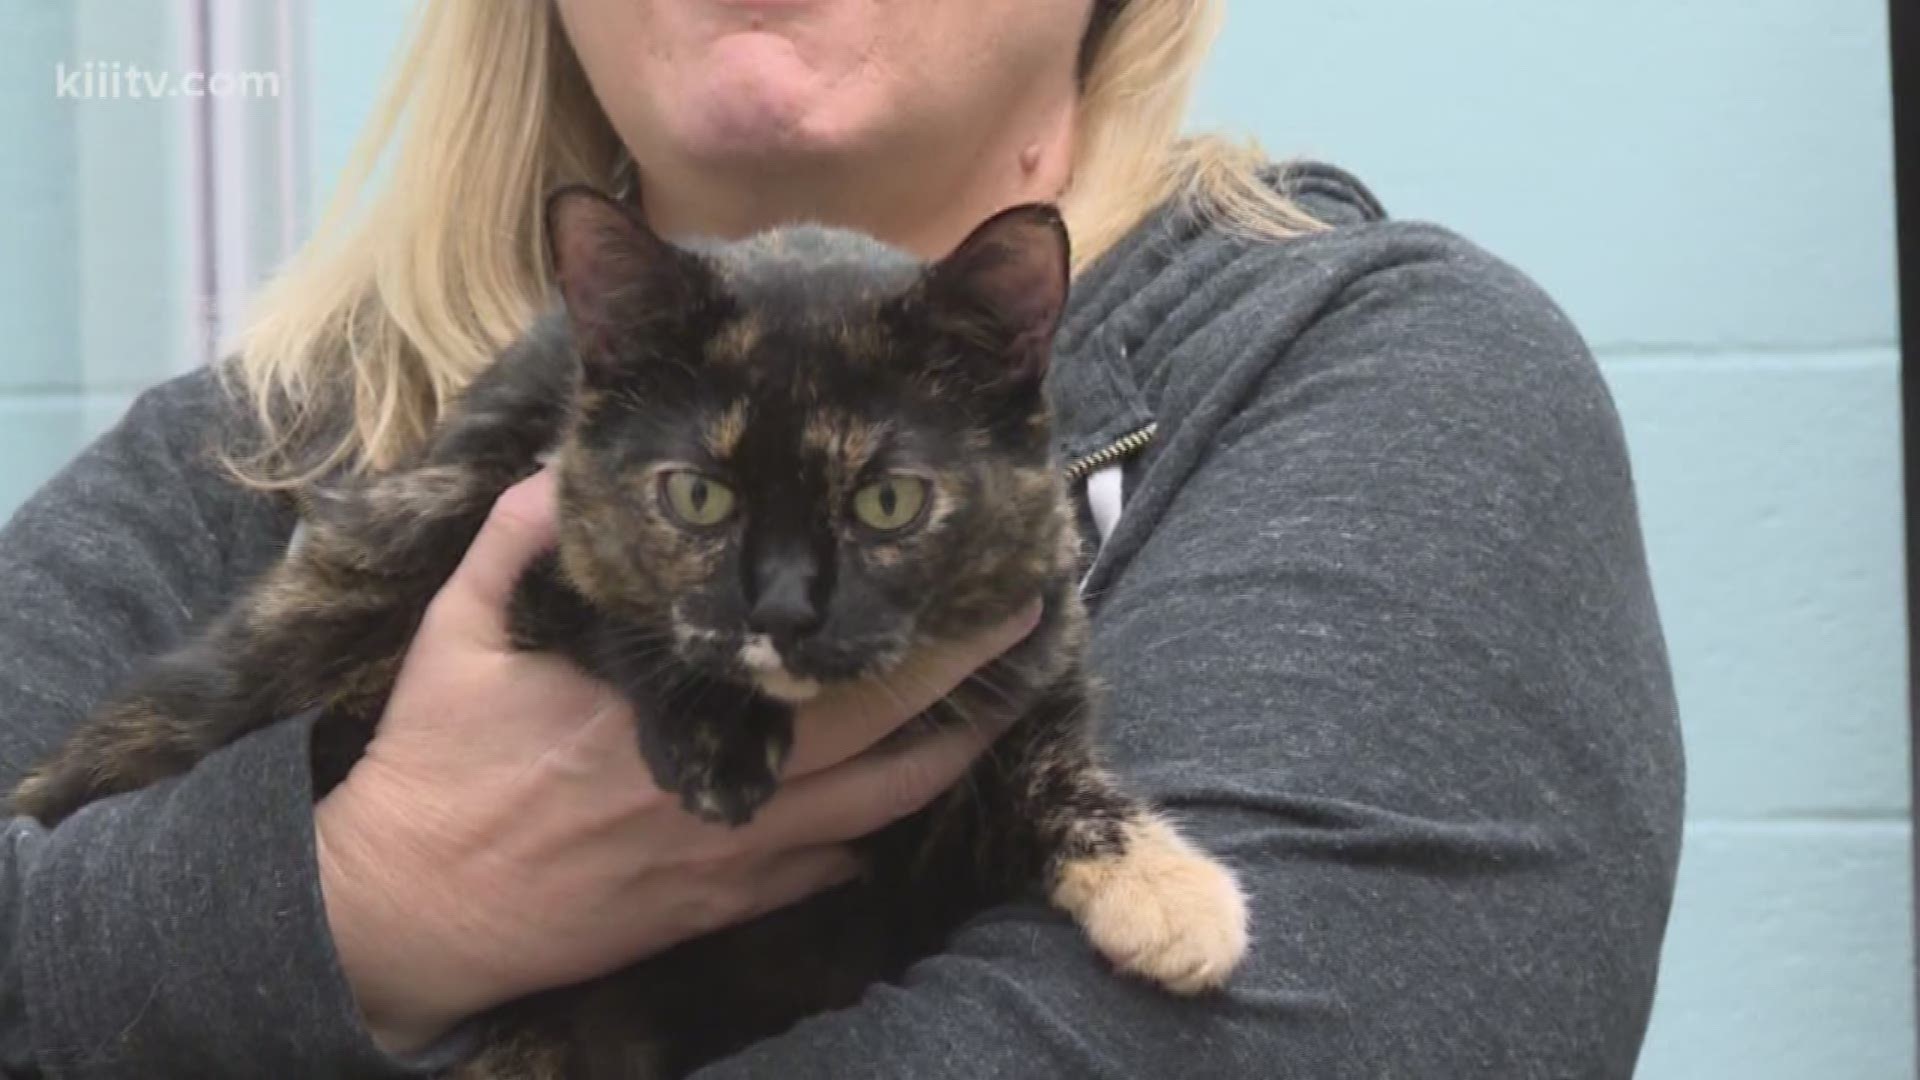 This Sunday's pet is this fluffy four year old cat names Callie. Head over to the Gulf Coast Humane Society to find our the requirements for adopting her or getting help with the right match for you and your home.